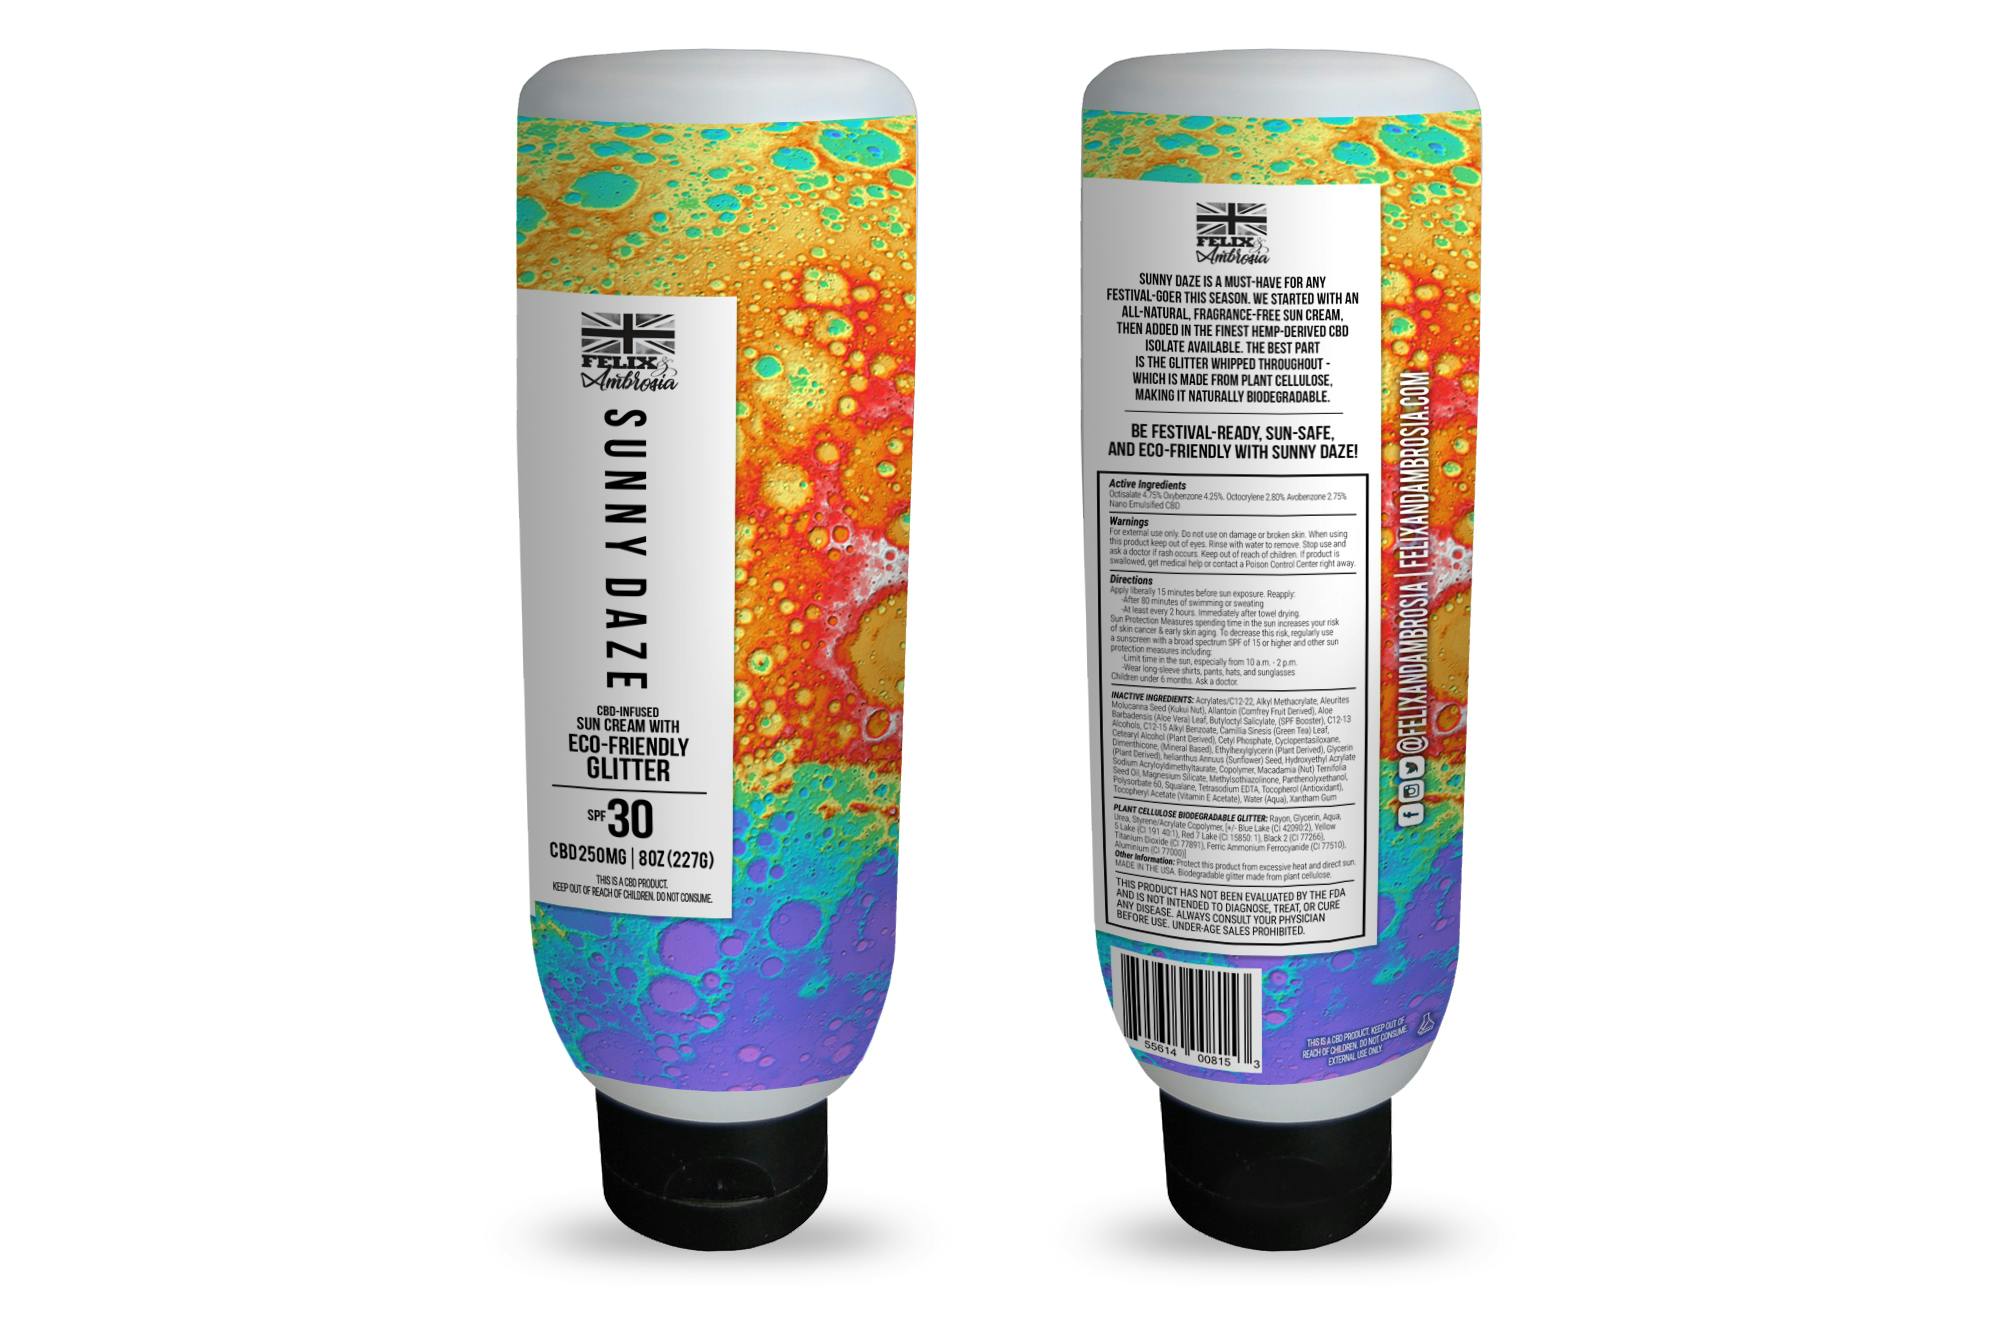 1 Elevate your festival season with CBD infused sunscreen and flavor drops